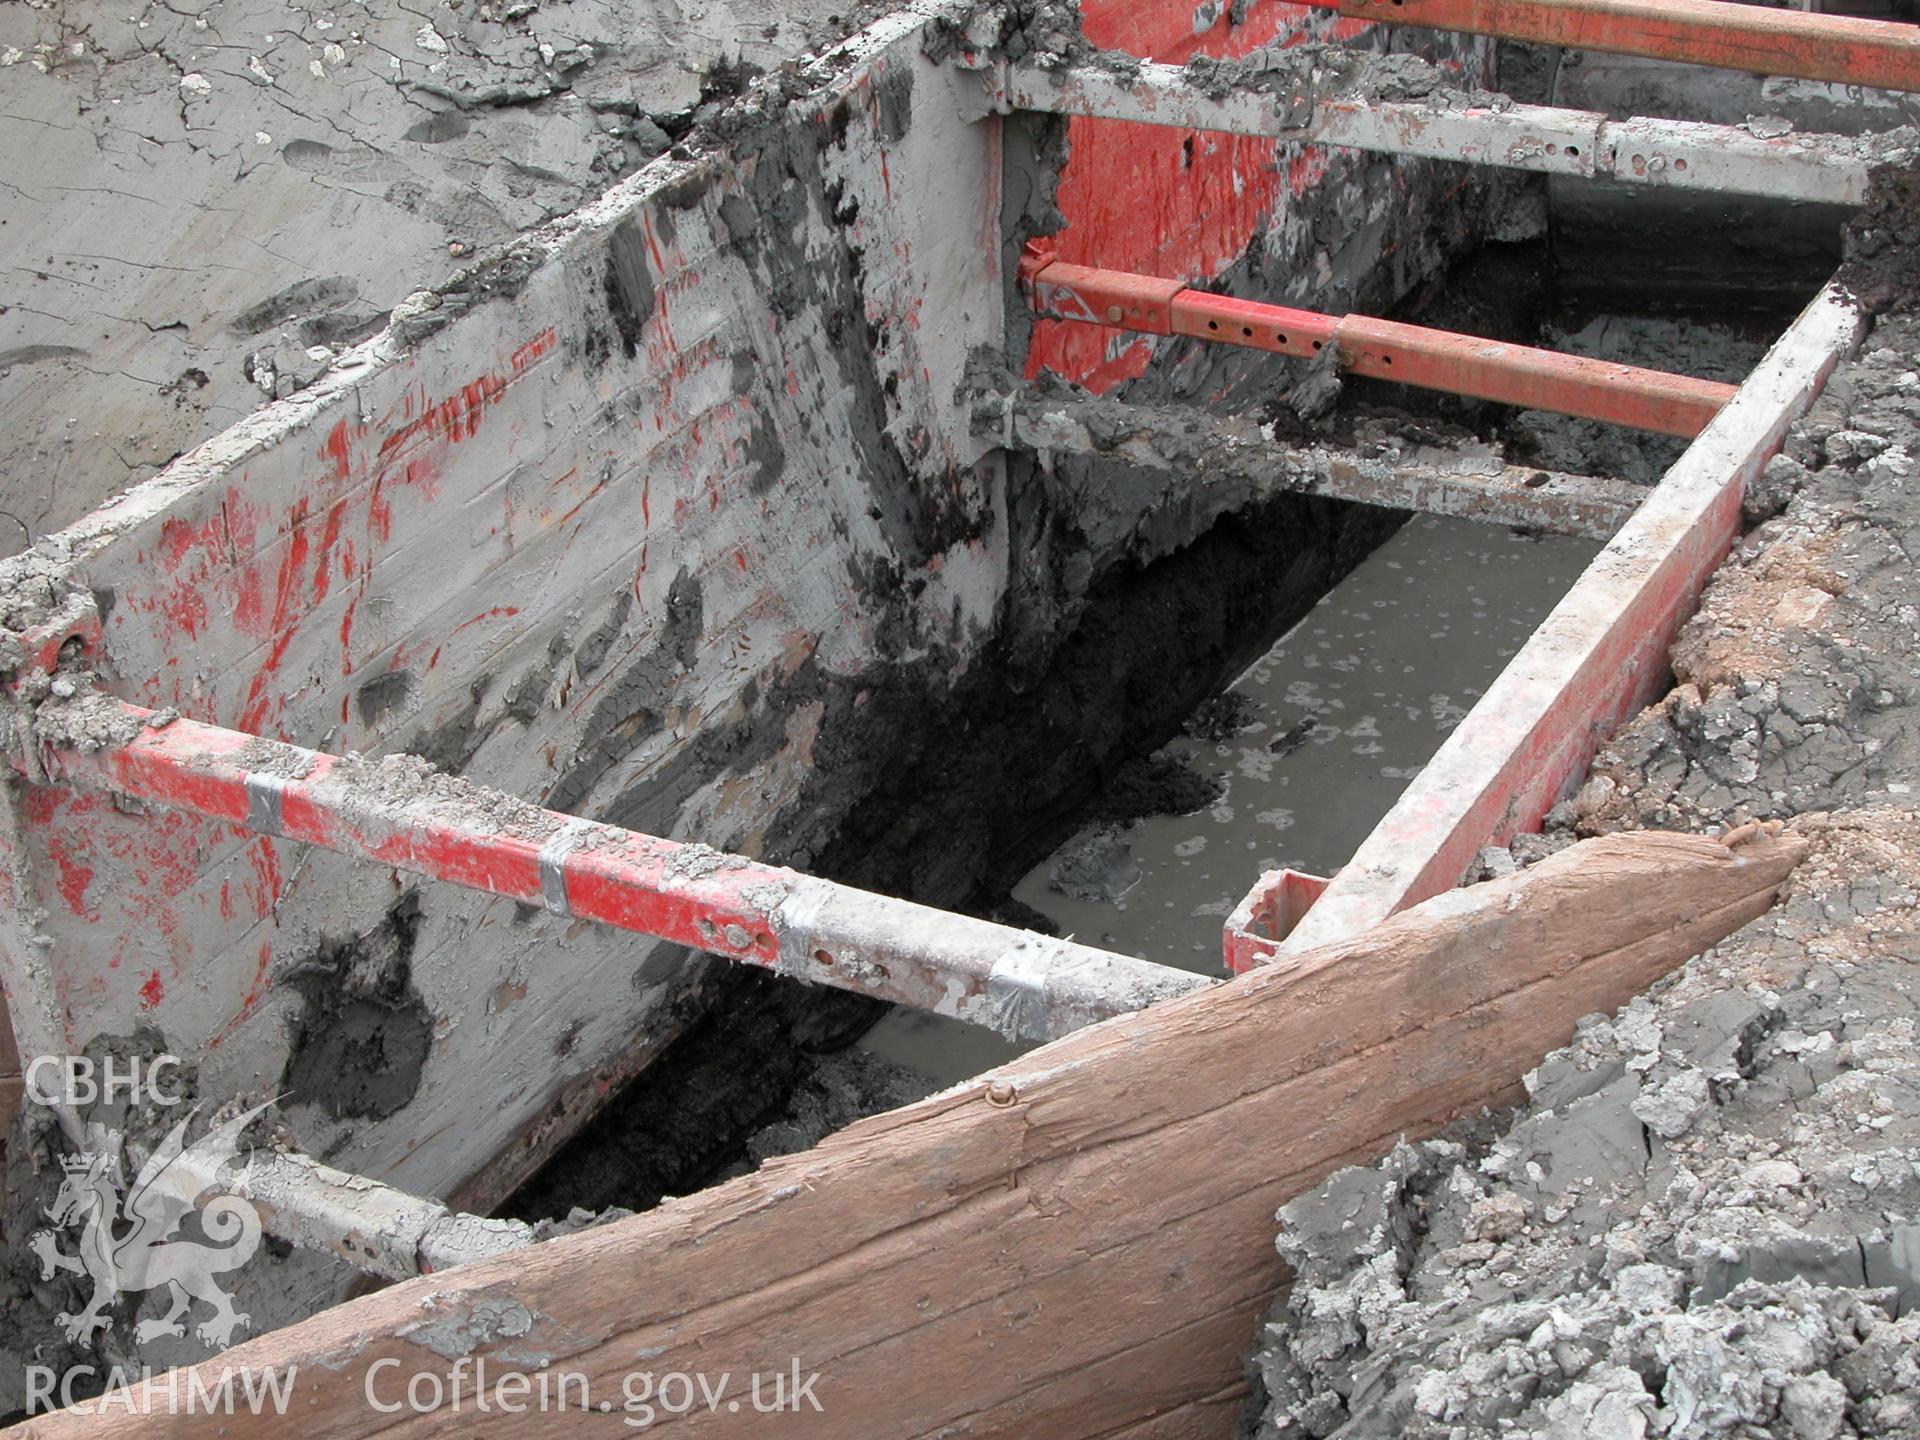 Colour digital photograph showing the junction of HDD1 and Ty Mawr Lane, showing a peat layer.